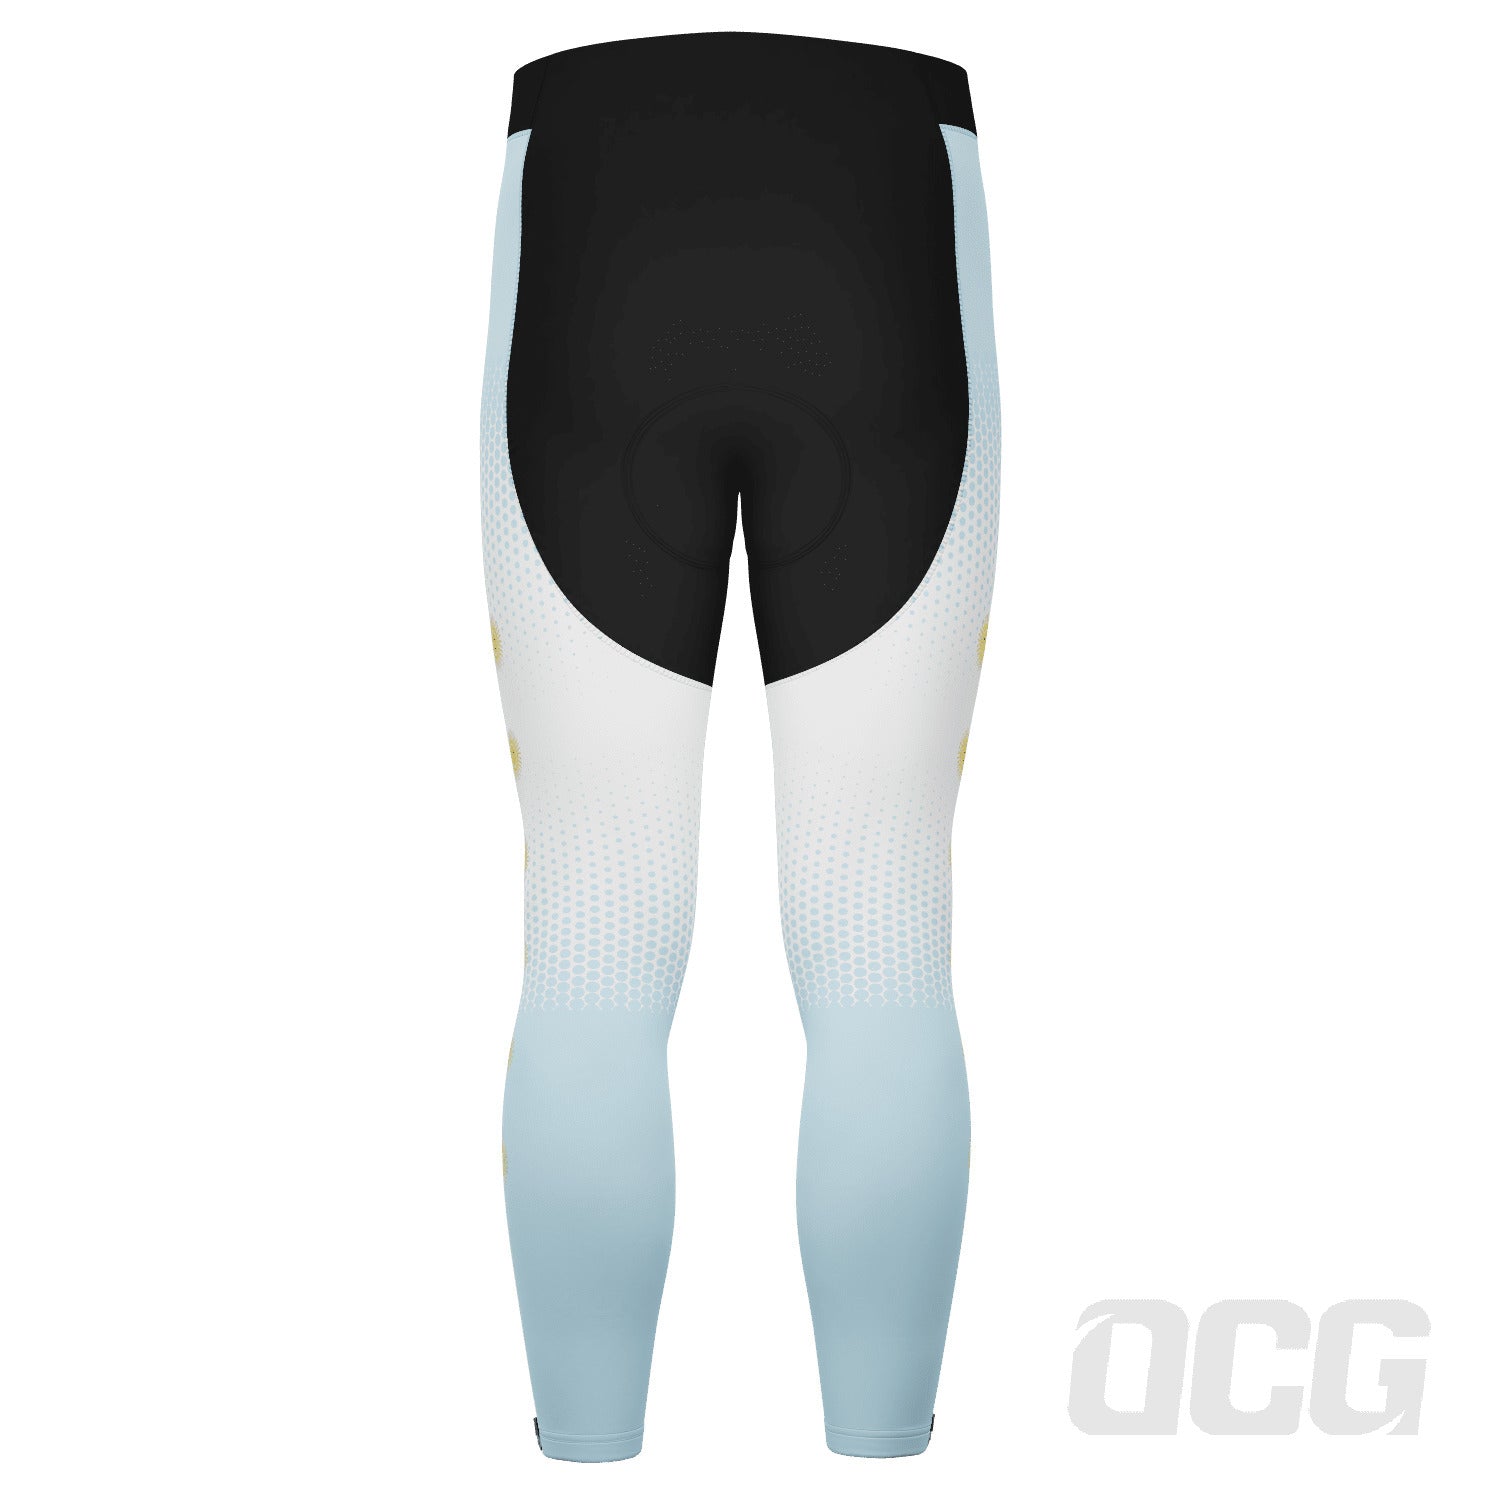 Men's World Countries Team Argentina Icon Gel Padded Cycling Bib-Tights